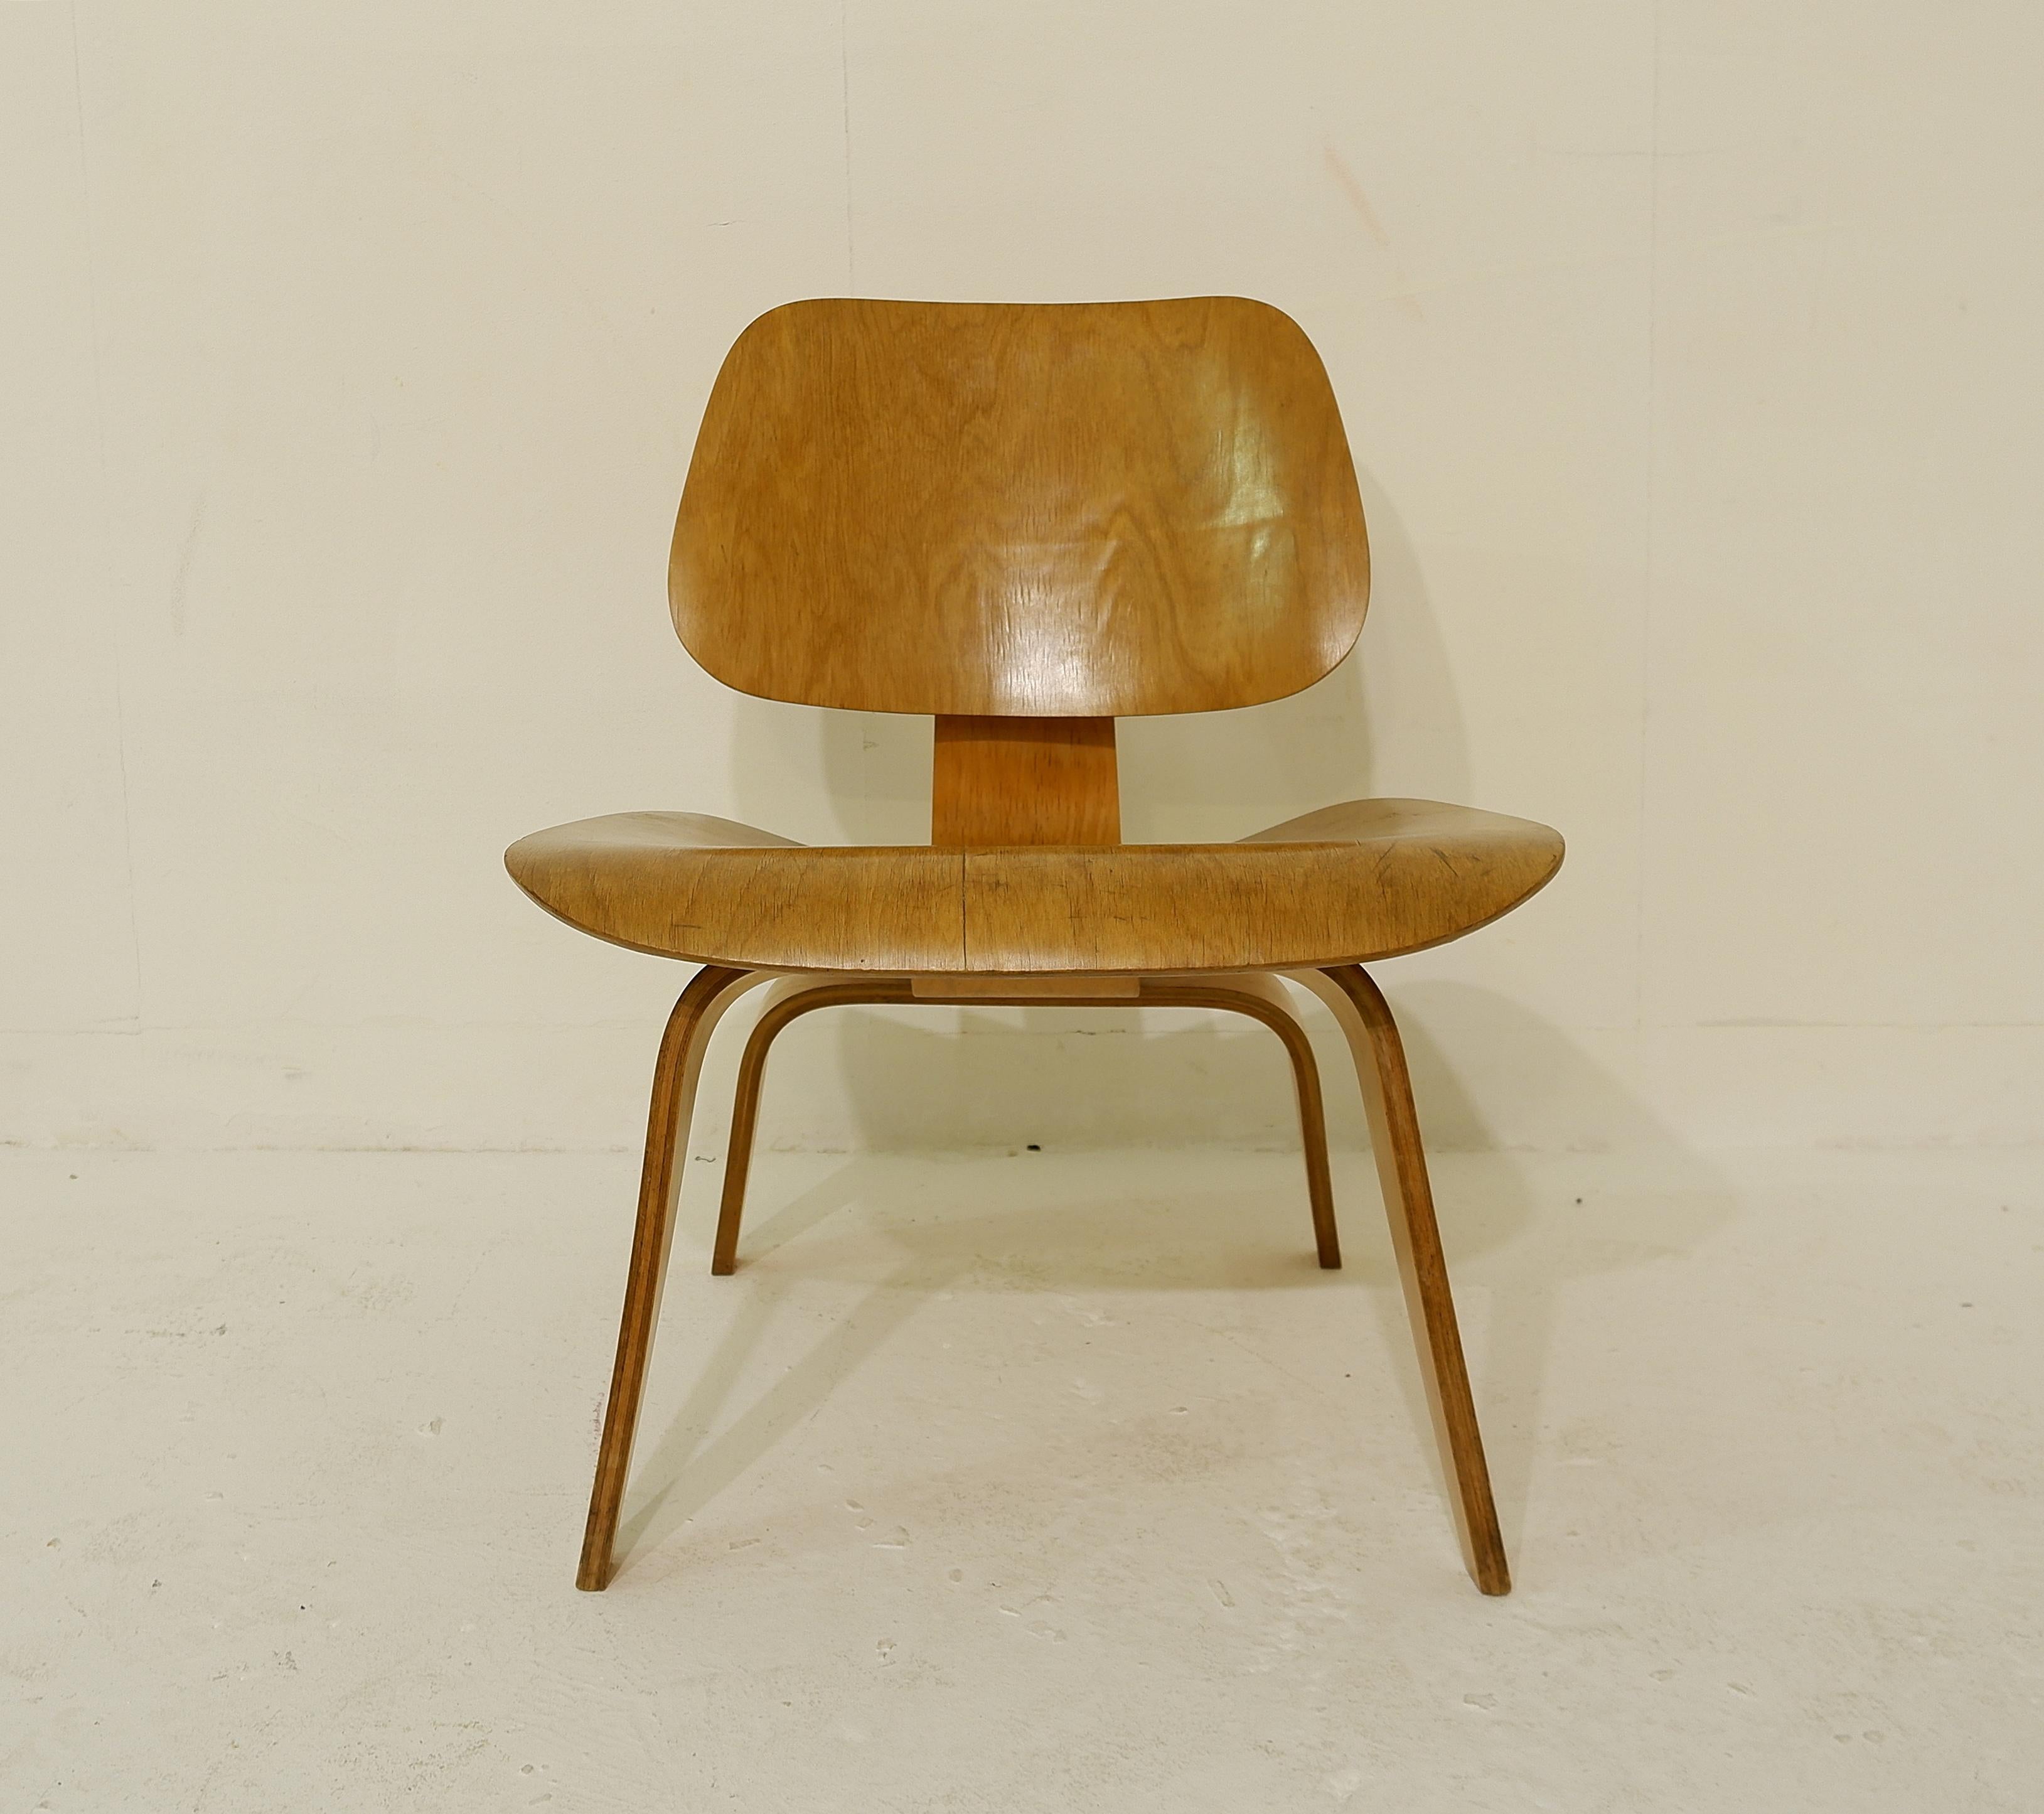 Chair model DCW in molded plywood, first edition by Charles & Ray Eames for Evans Products Company & Herman Miller, 1946.